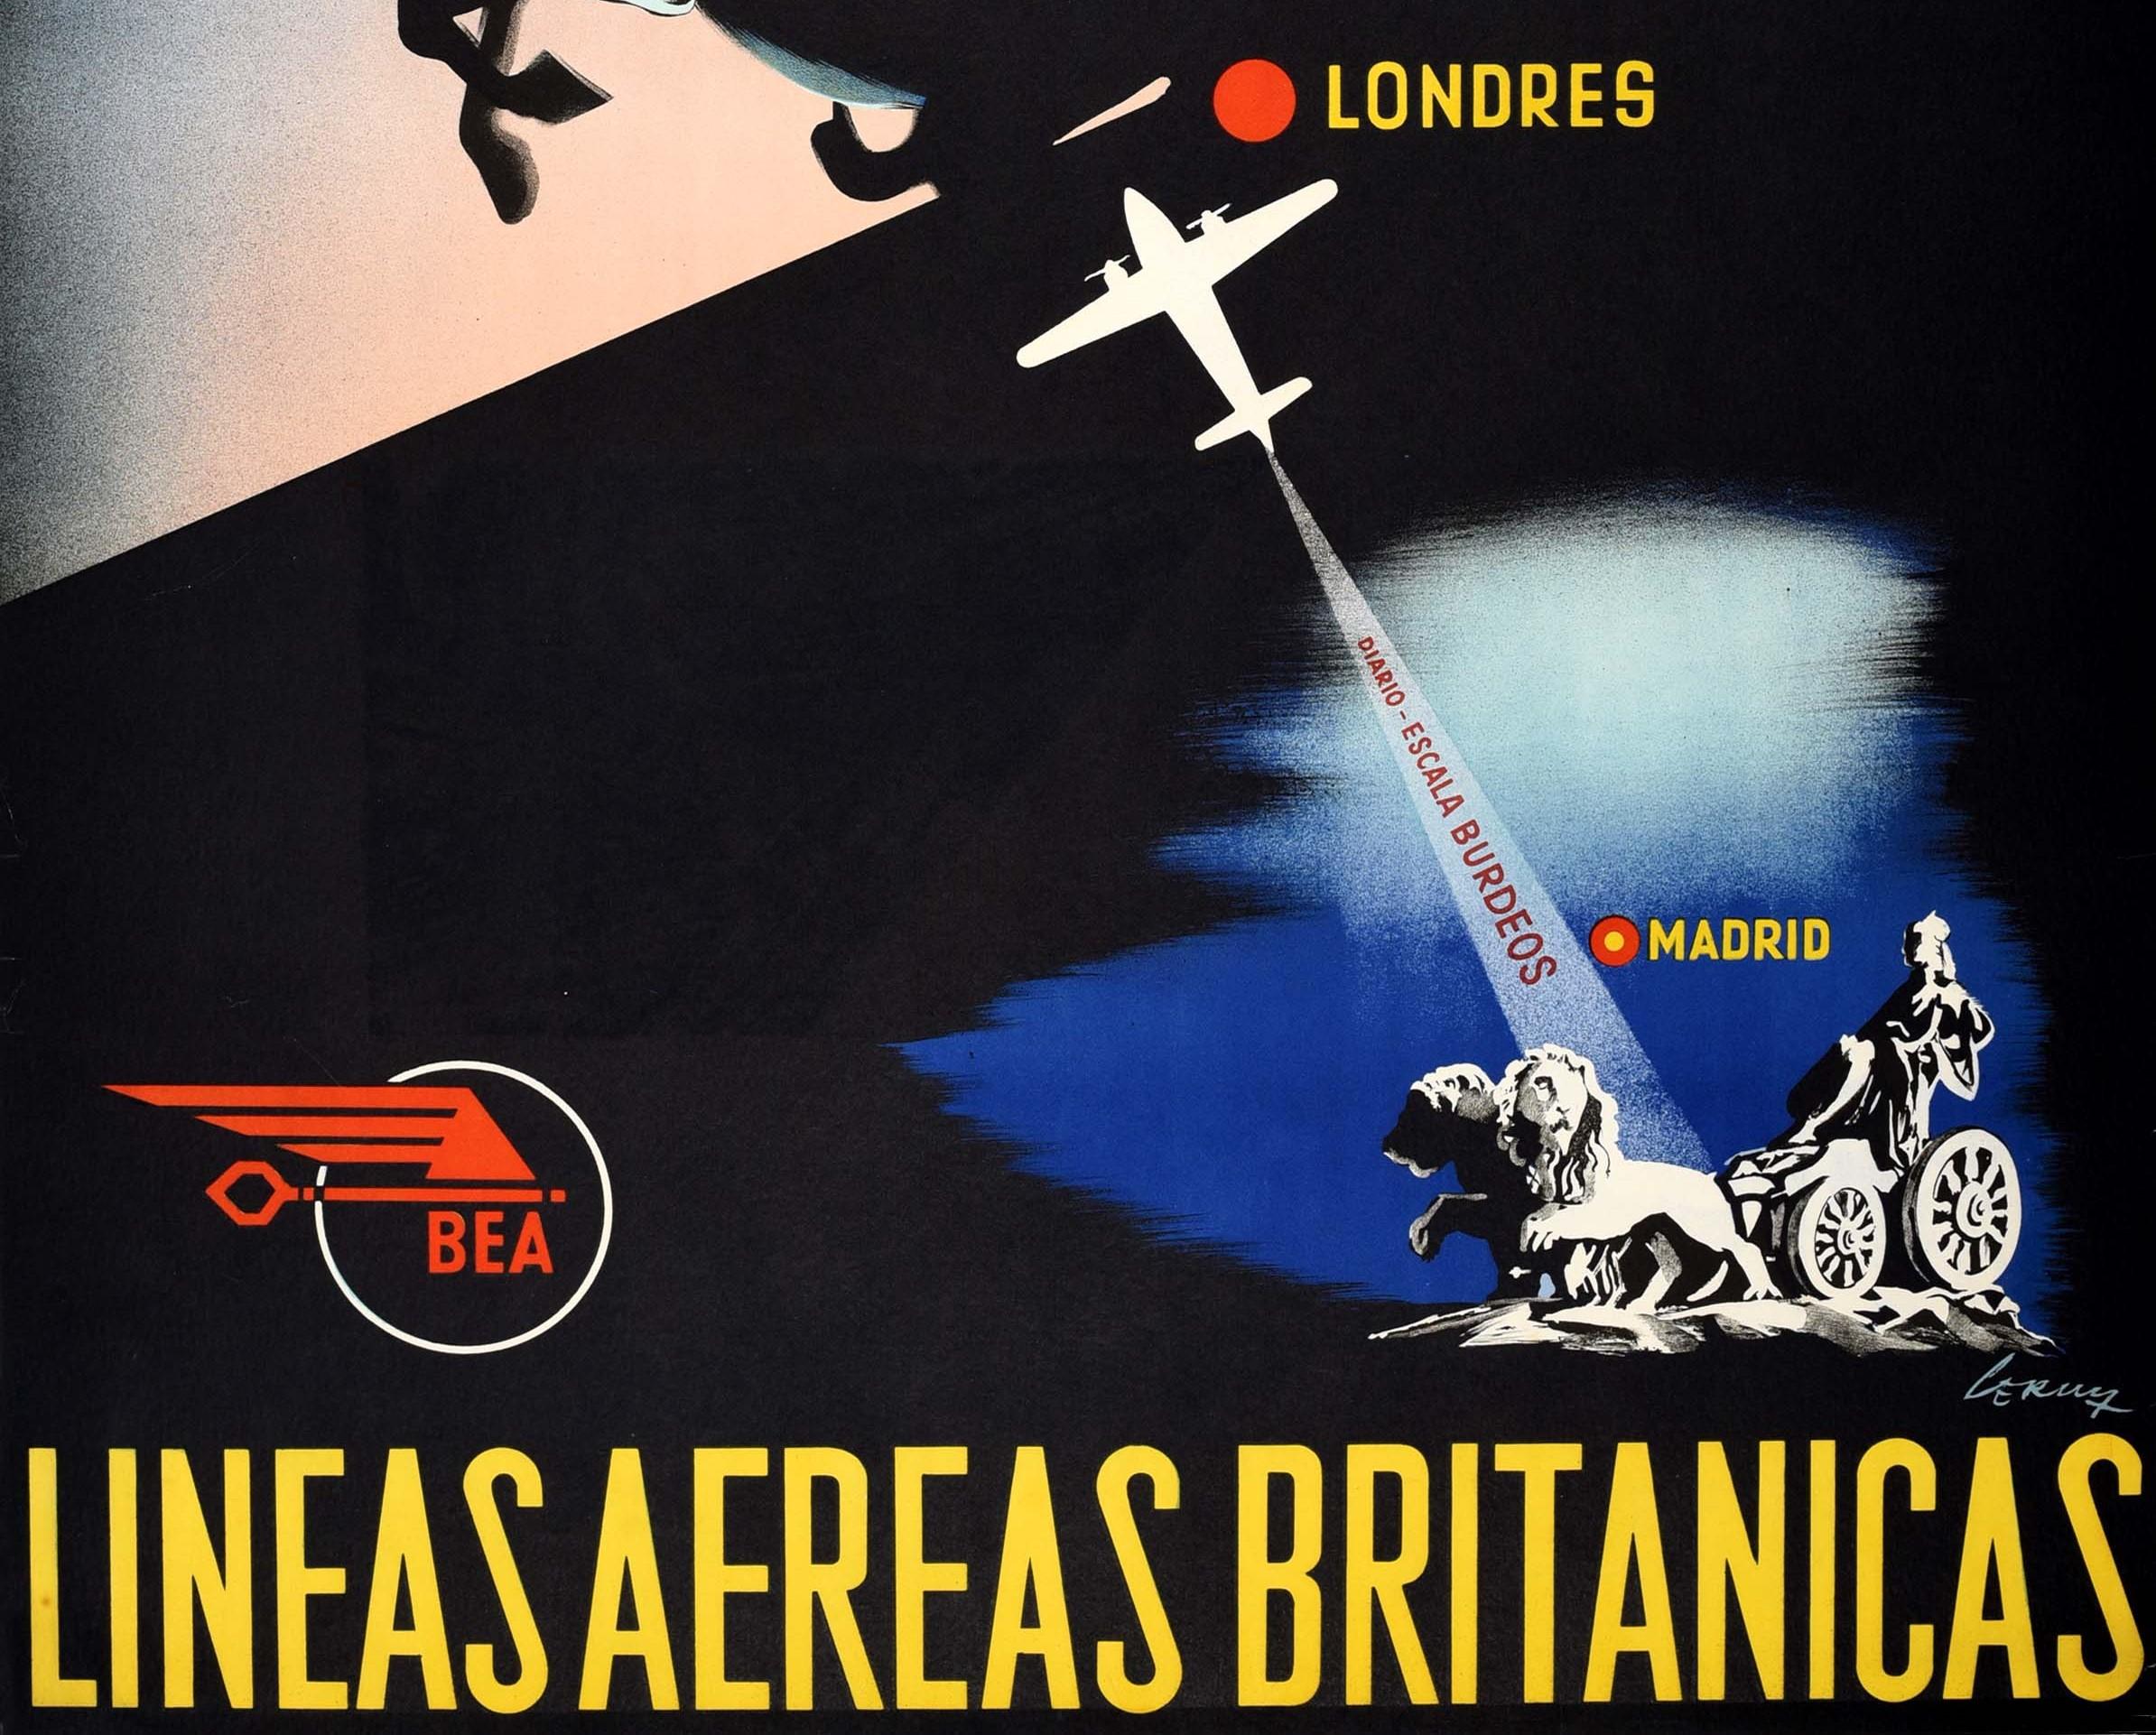 Mid-20th Century Original Vintage Airline Travel Poster Madrid To London BEA To The Whole World For Sale